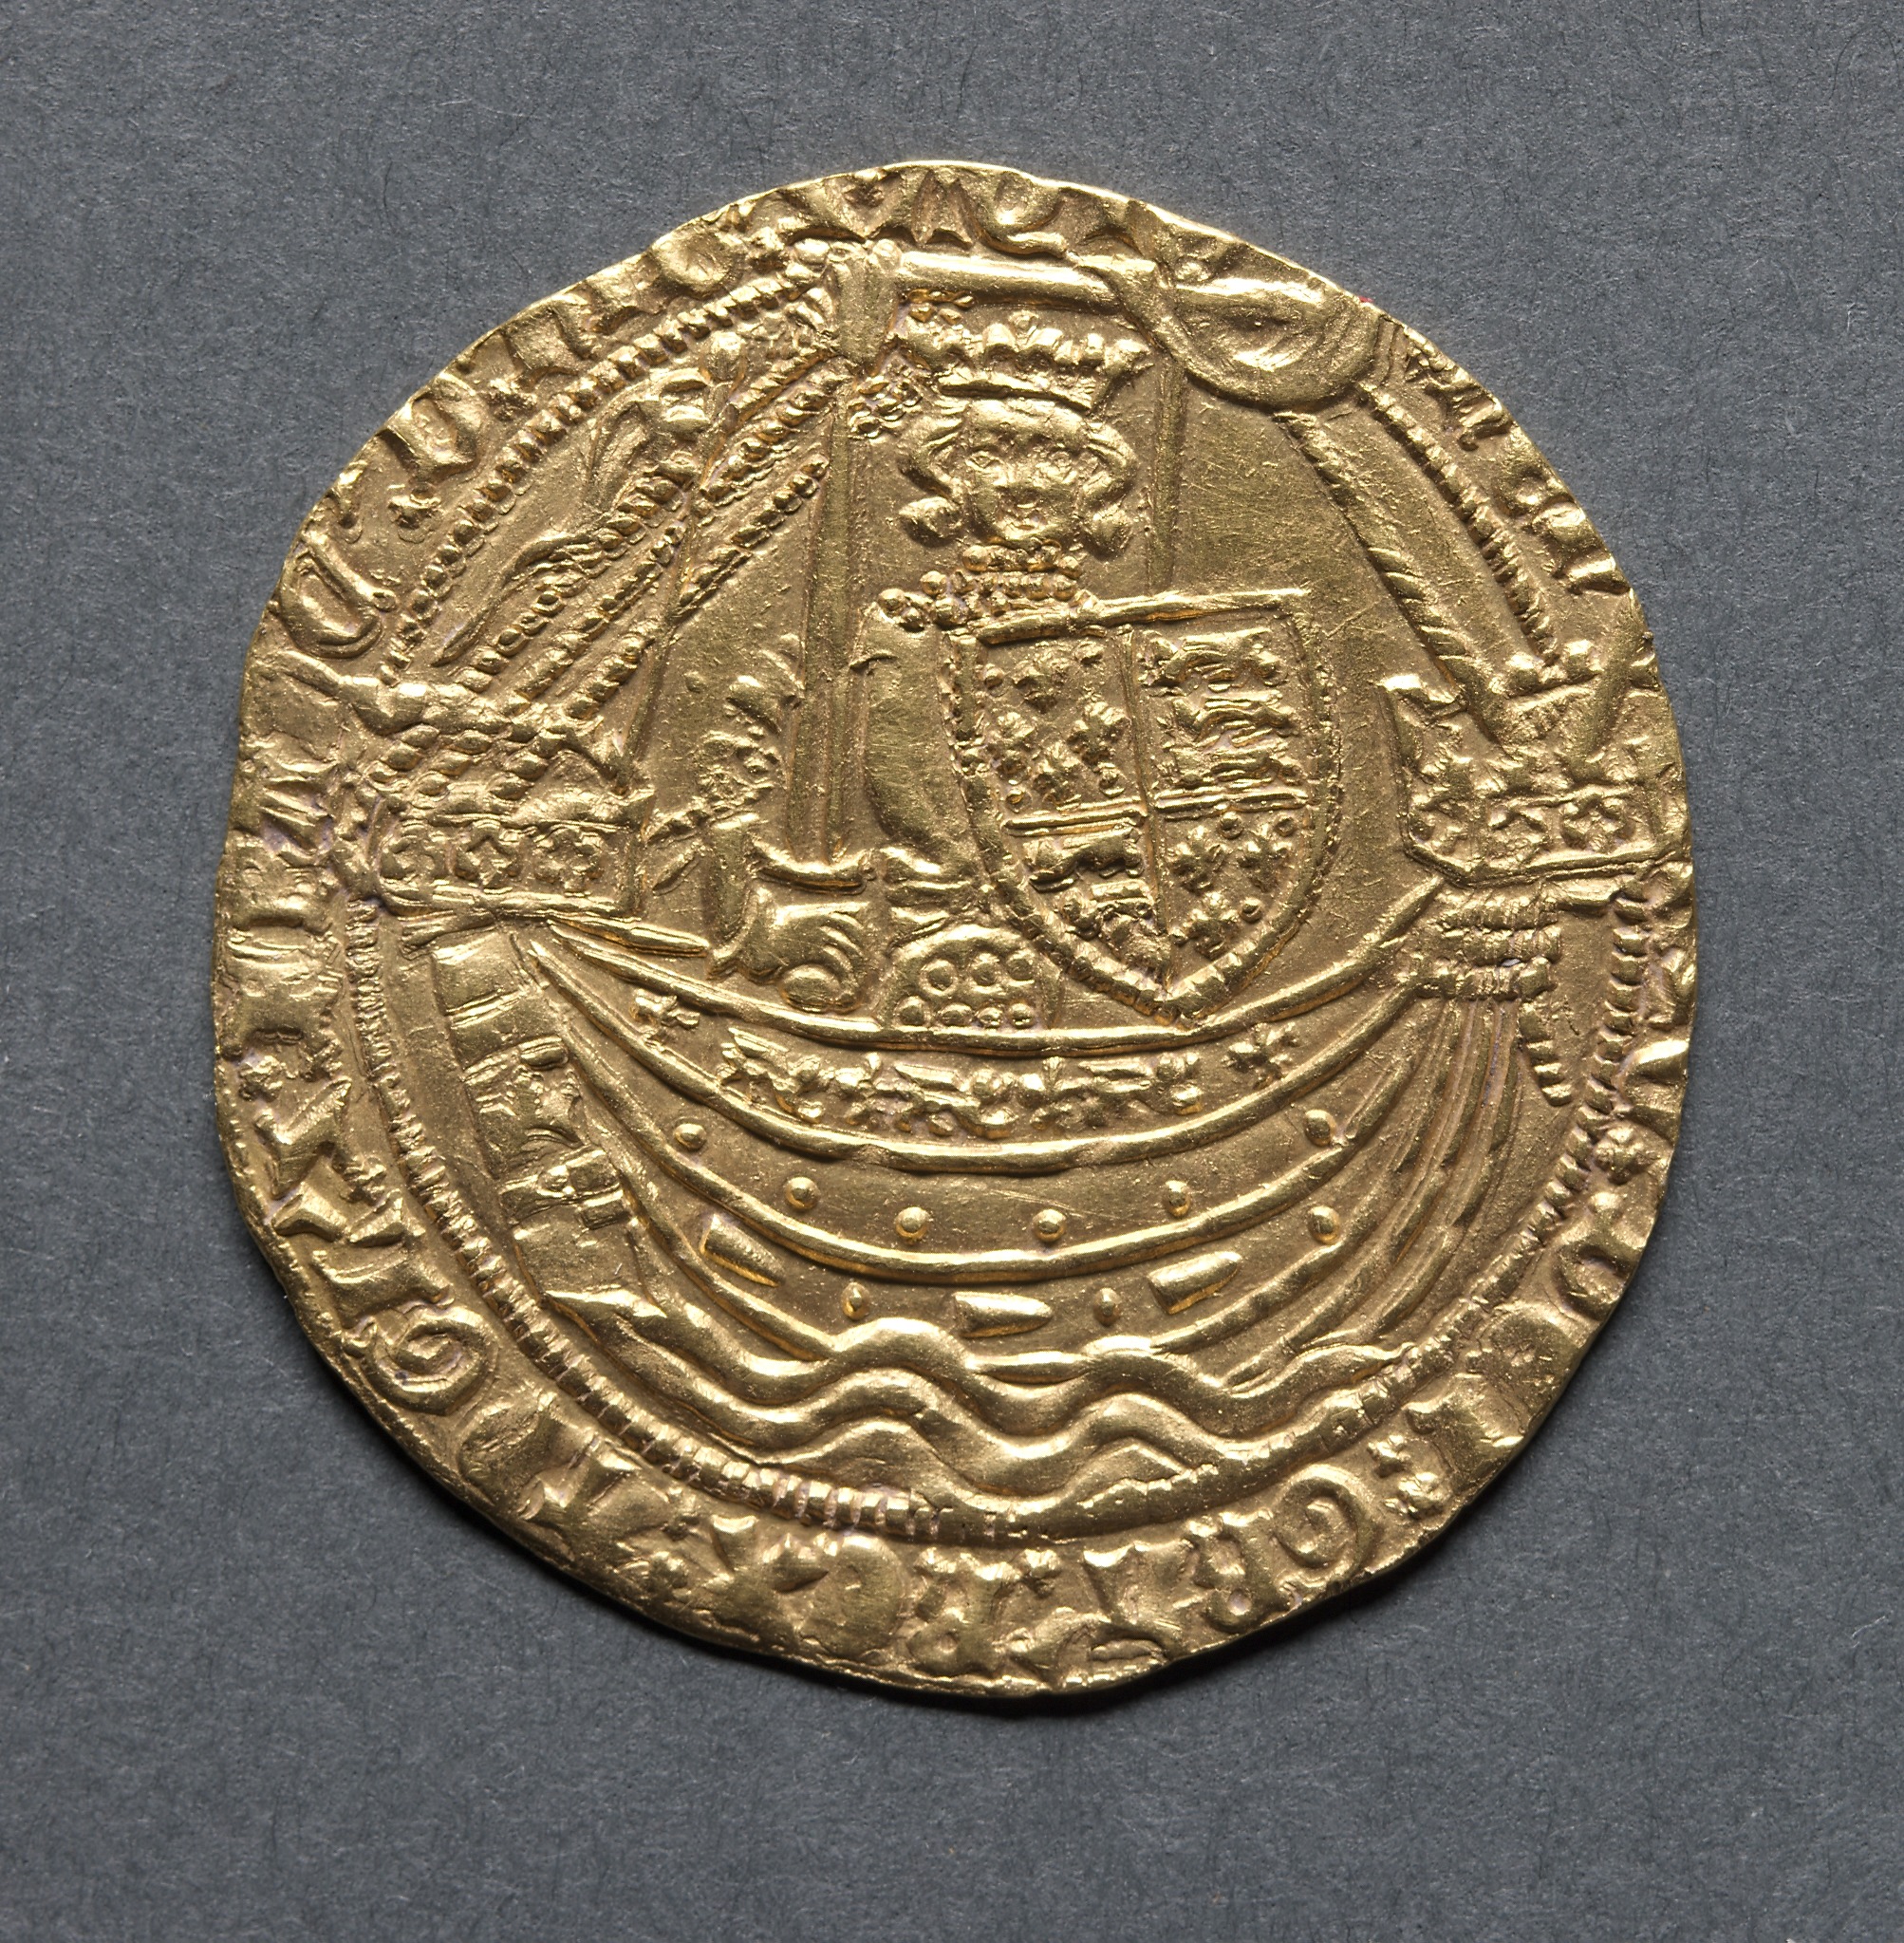 Noble: Henry IV Standing in Ship with Shield of Arms (obverse); Ornamental Cross with Lis Terminals (reverse)